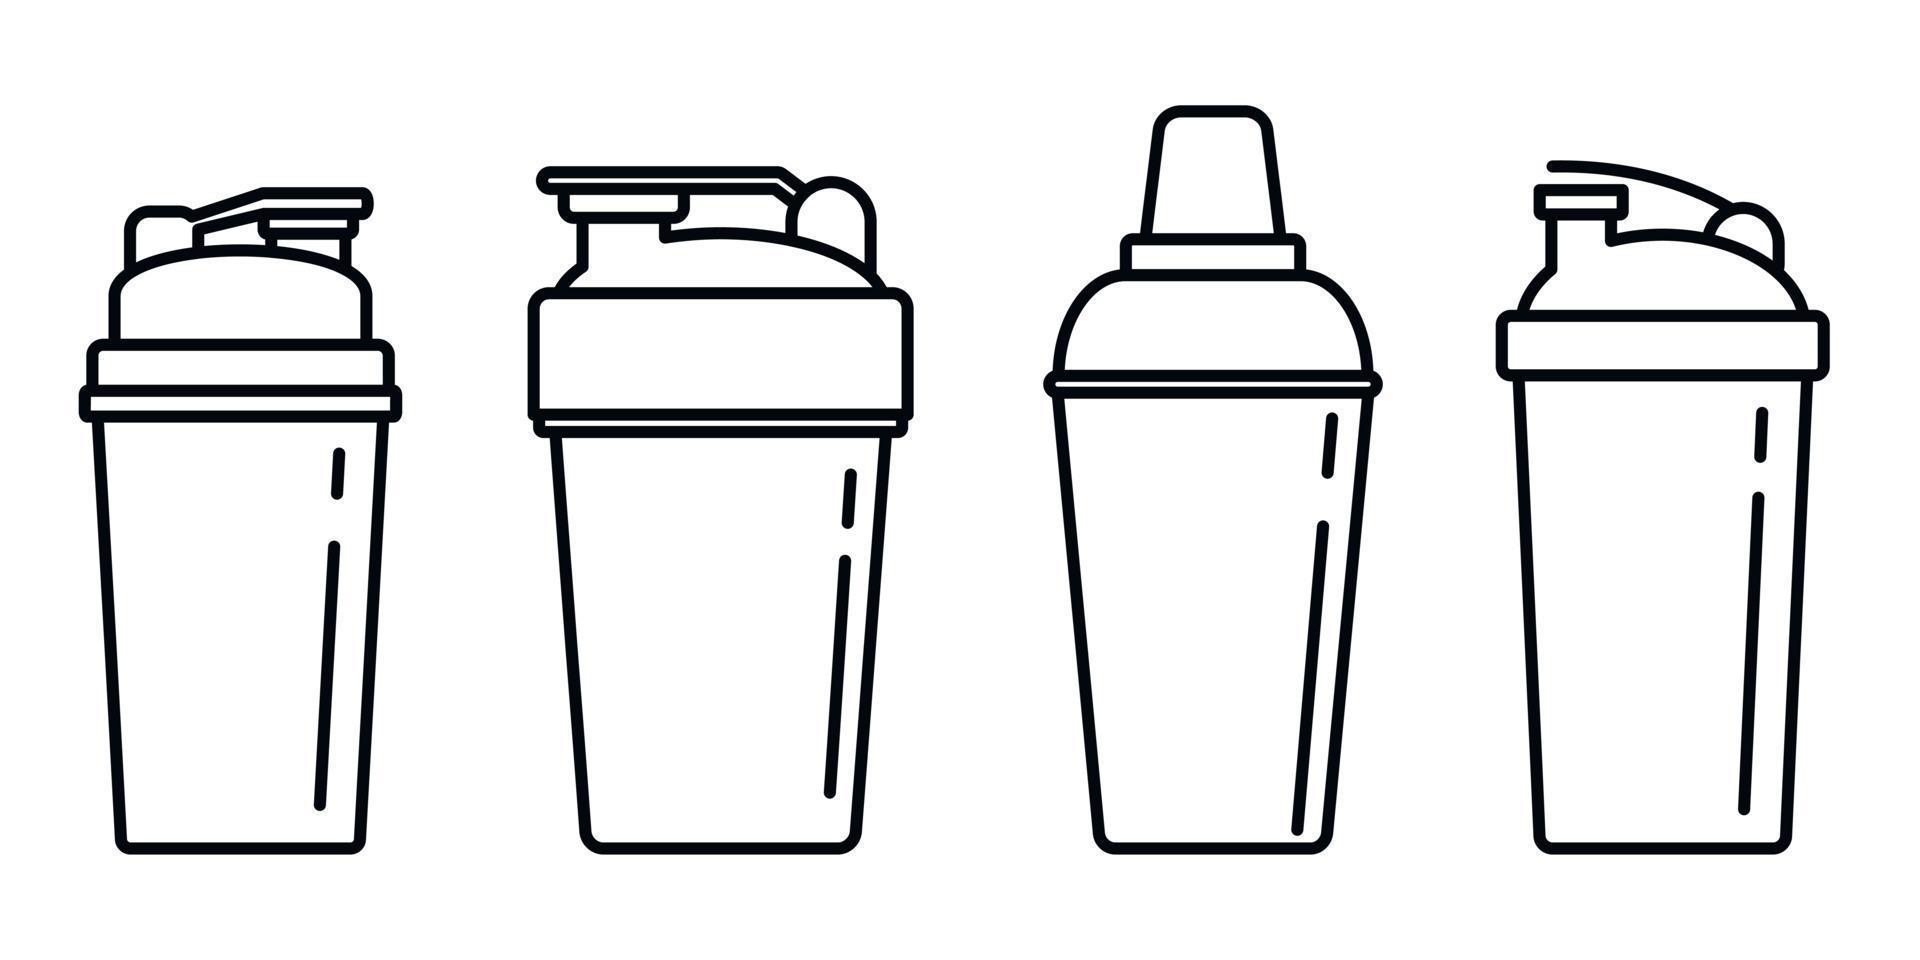 Shaker cup icons set, outline style vector